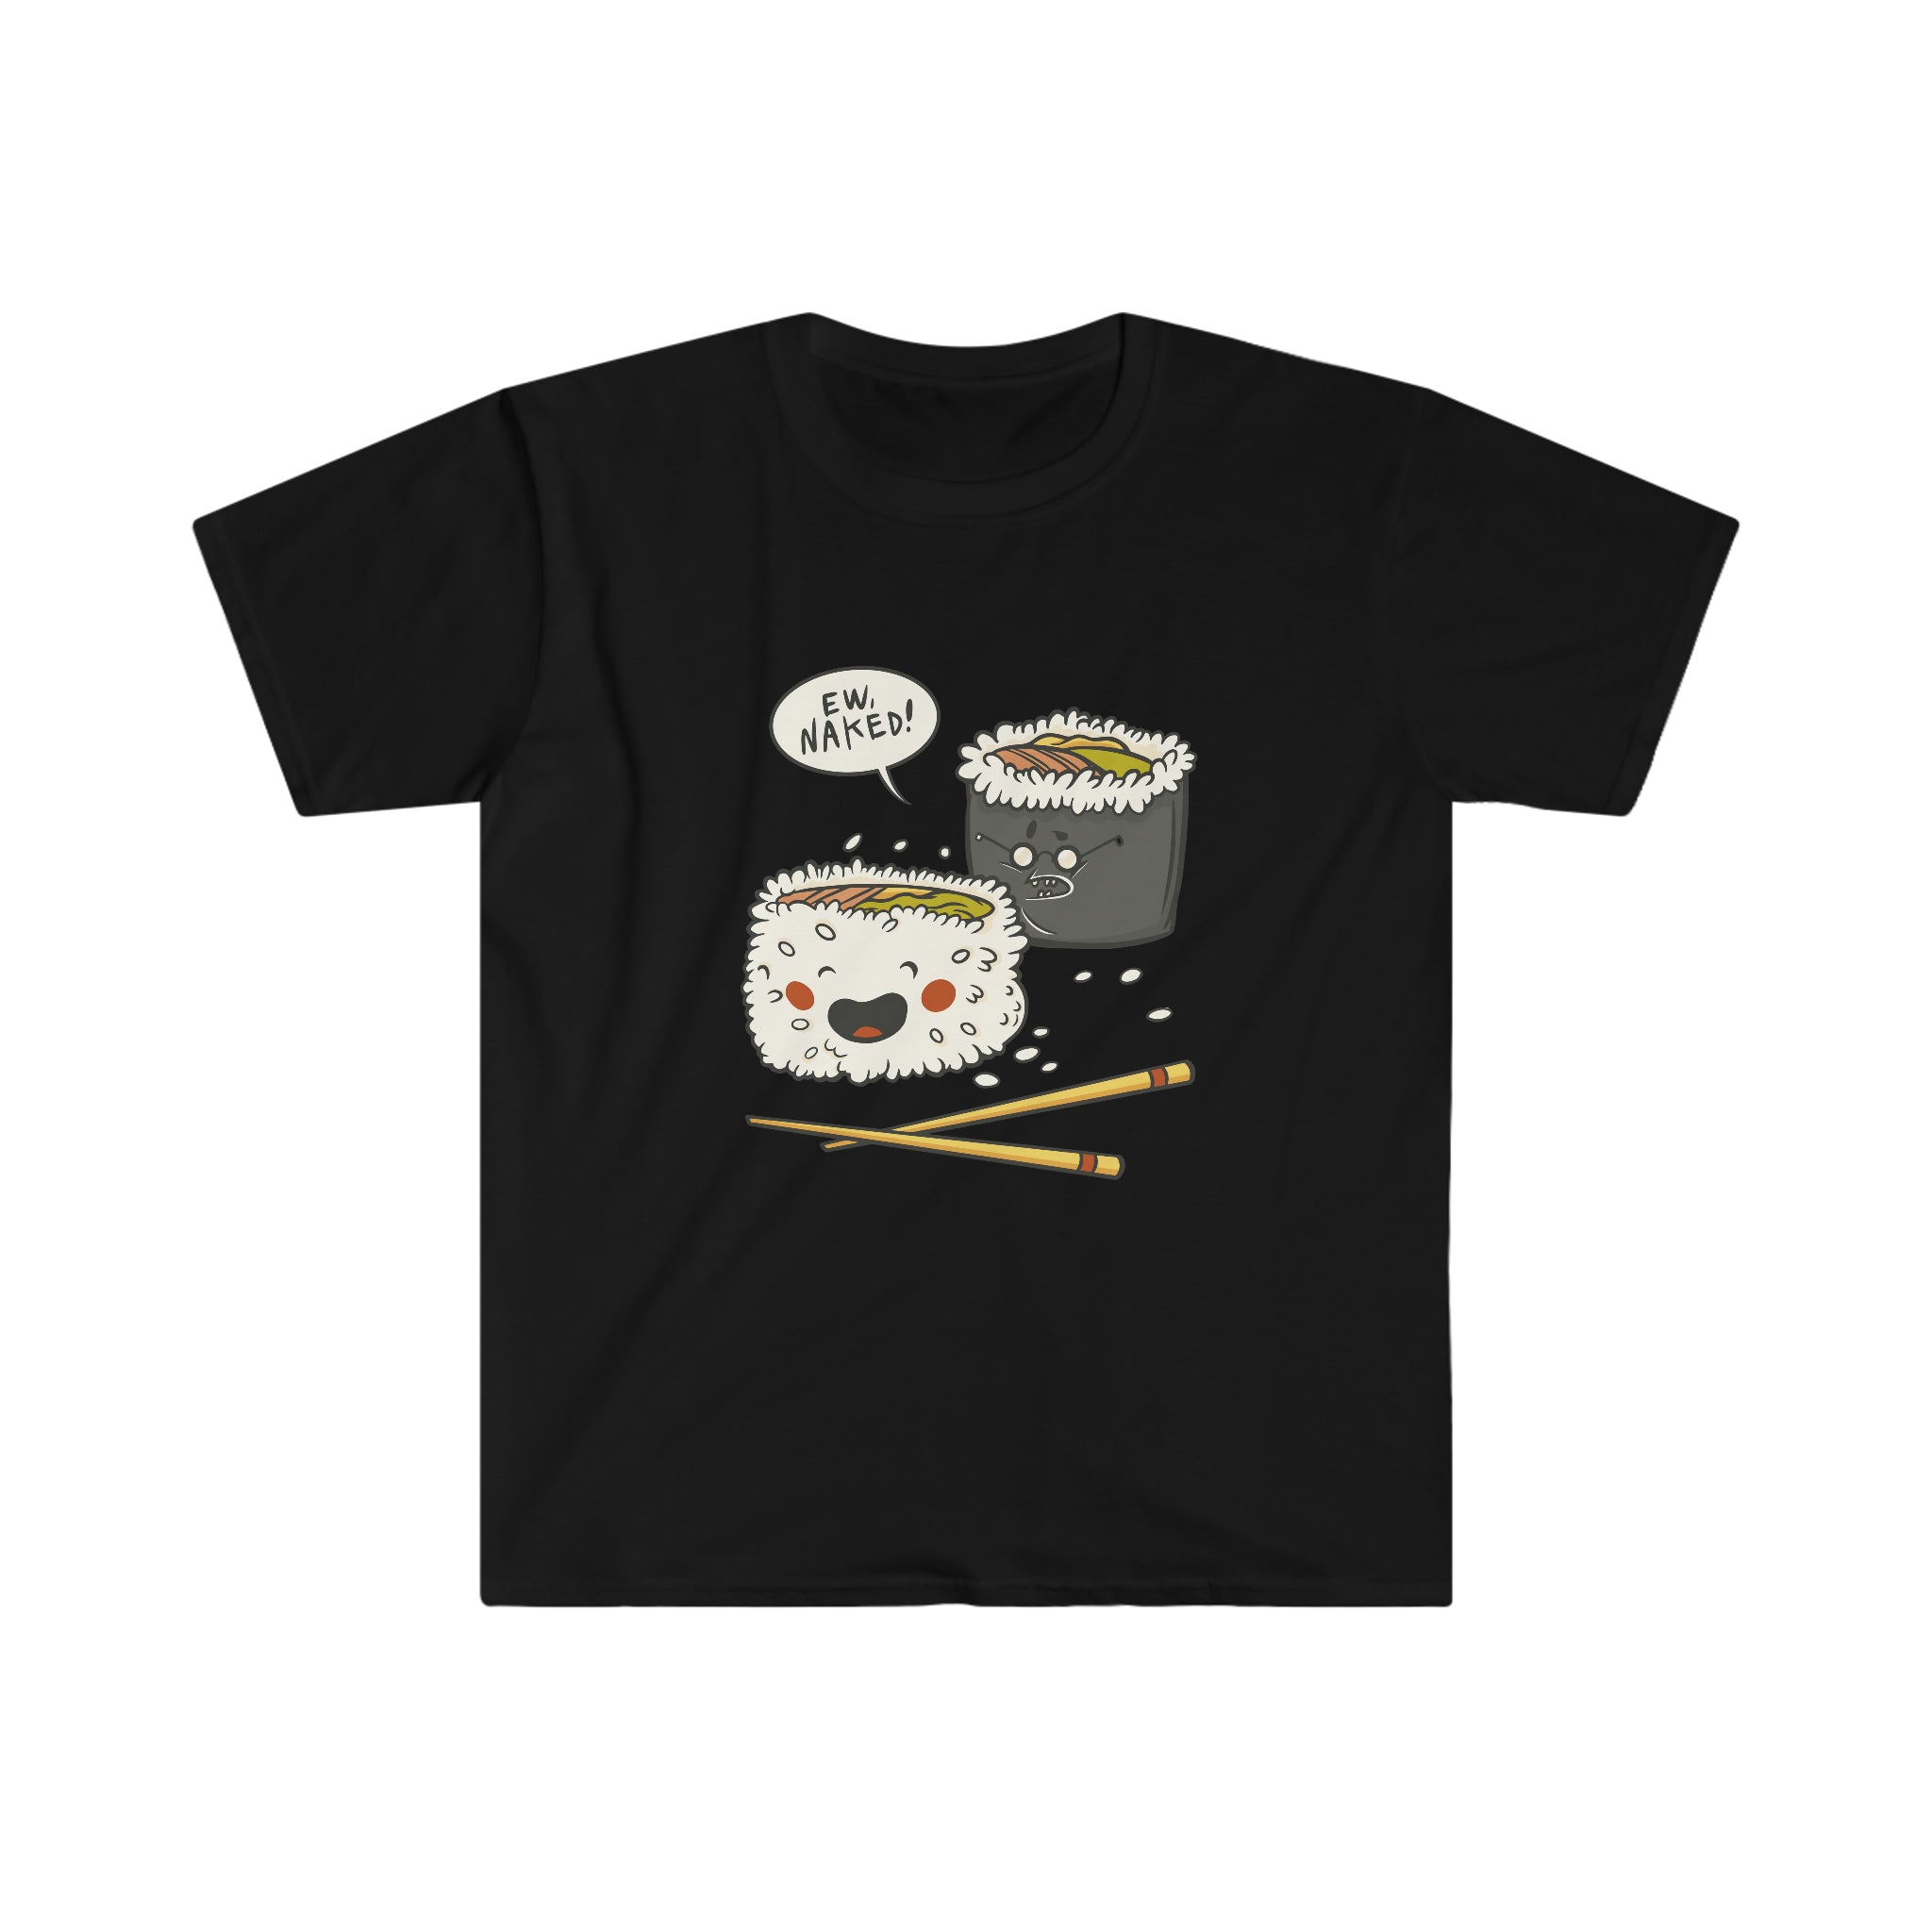 A Naked Sushi T-Shirt featuring an image of sushi and chopsticks.